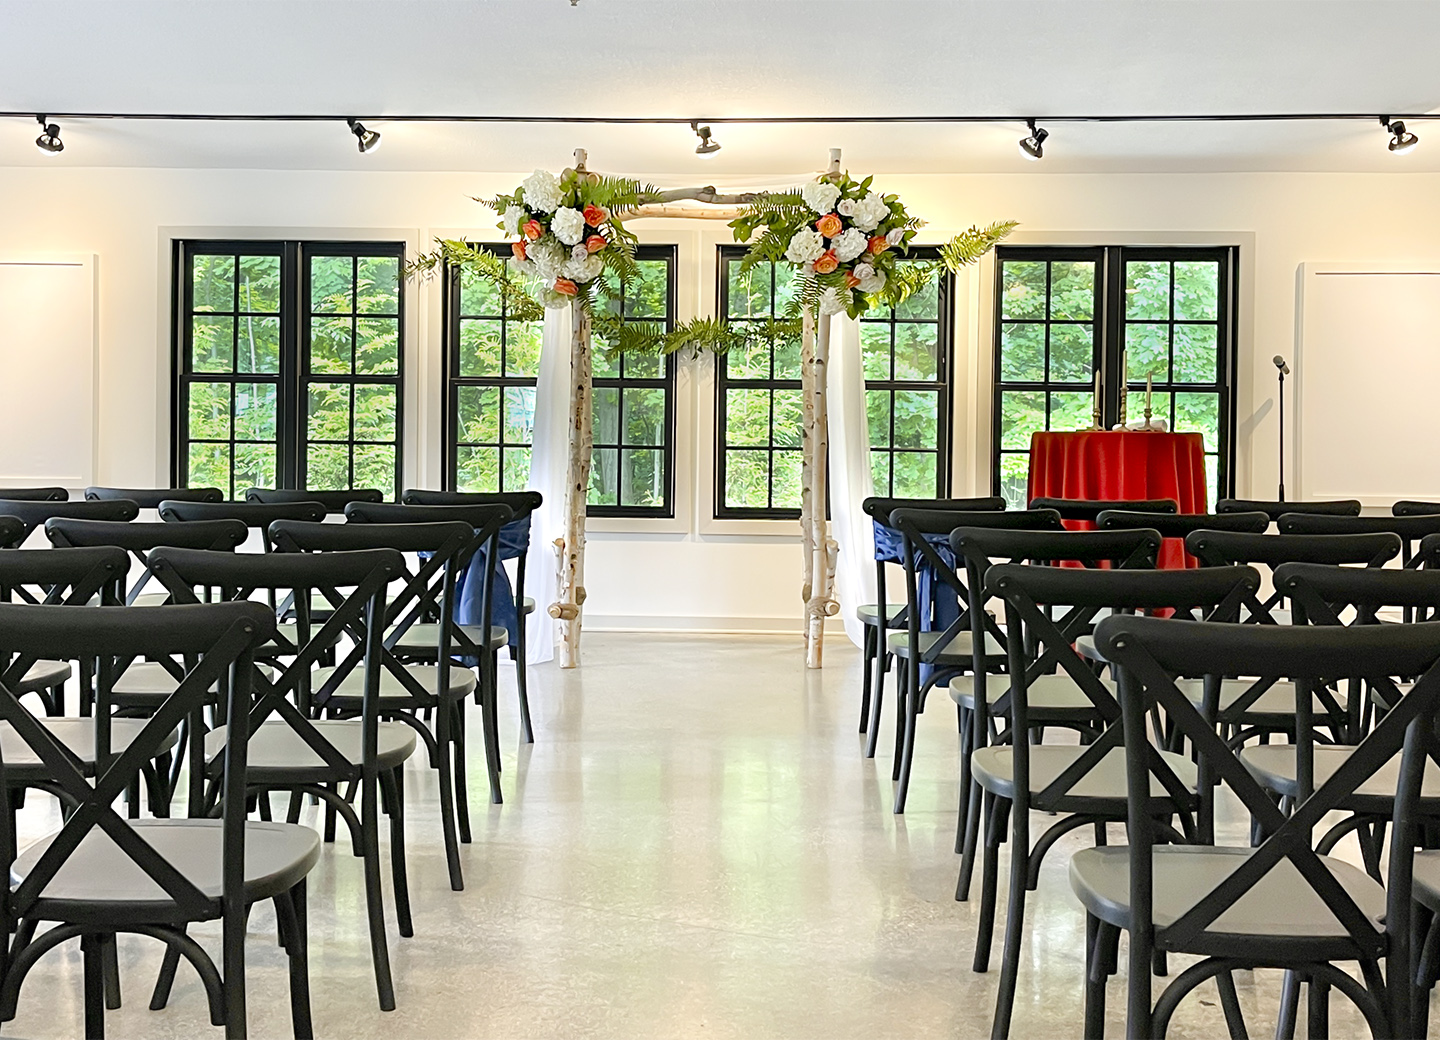 Ceremony set up indoor dining area with black cross back chairs and hoopo with flowers.